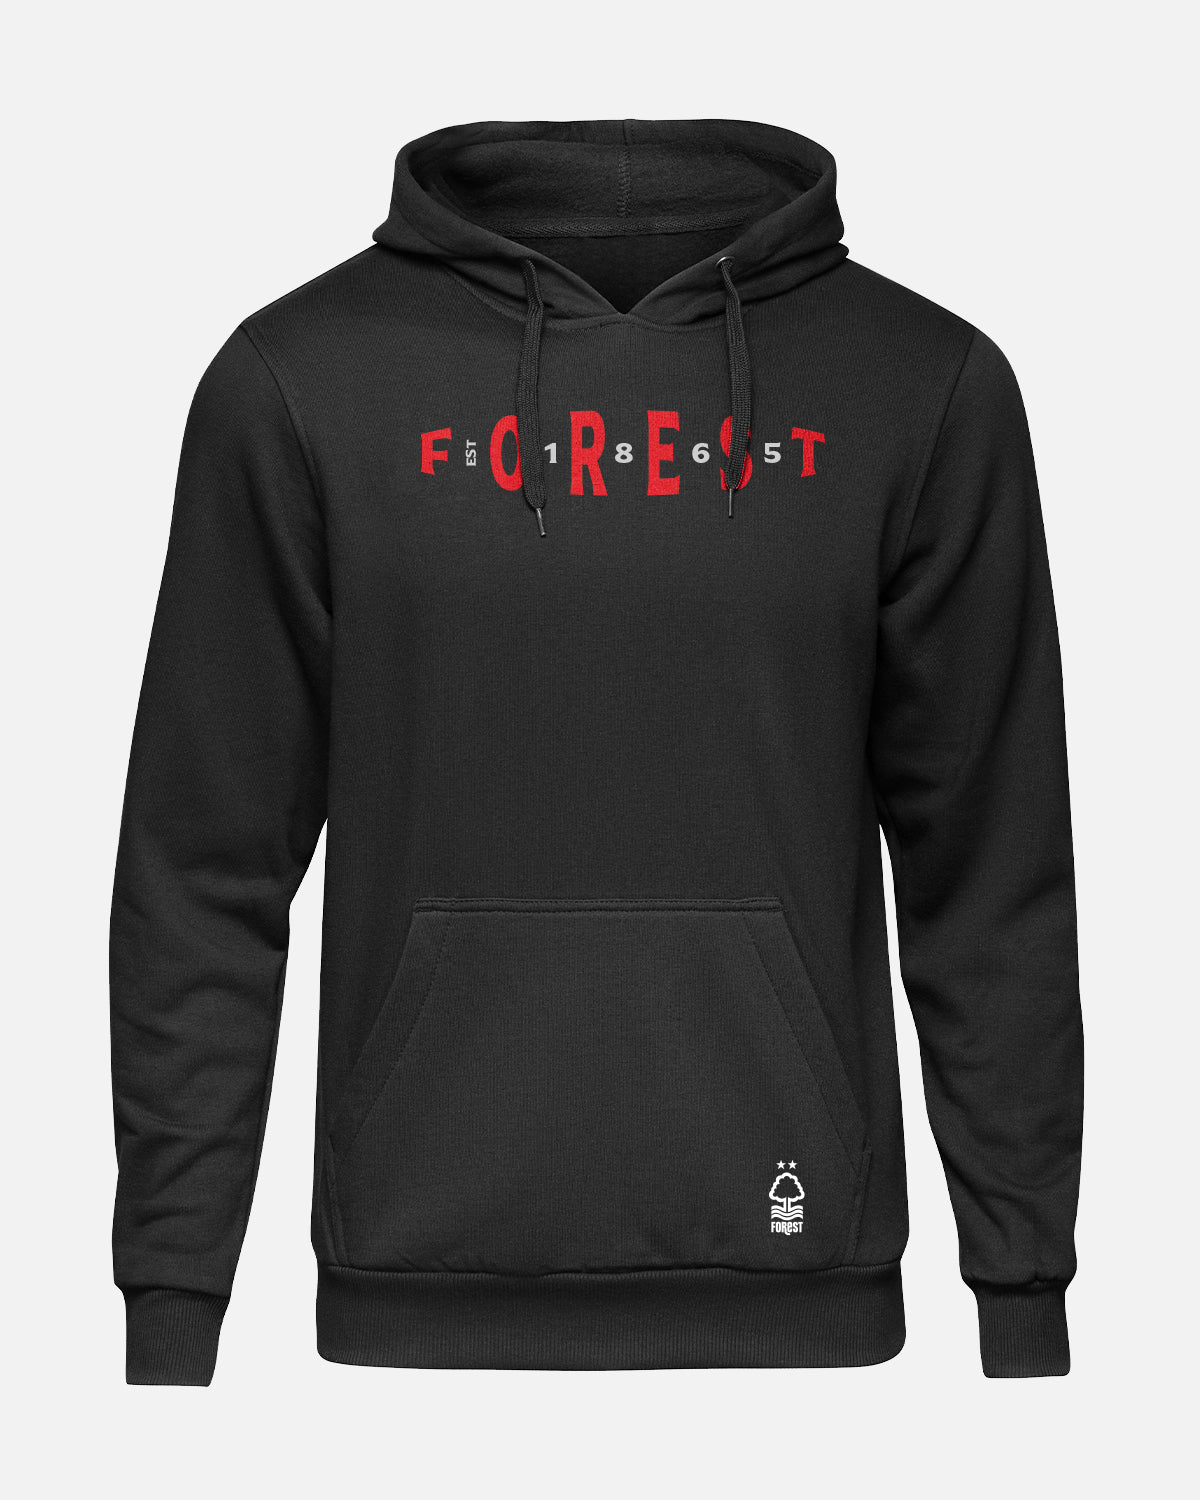 NFFC Black Est Collection Hoodie